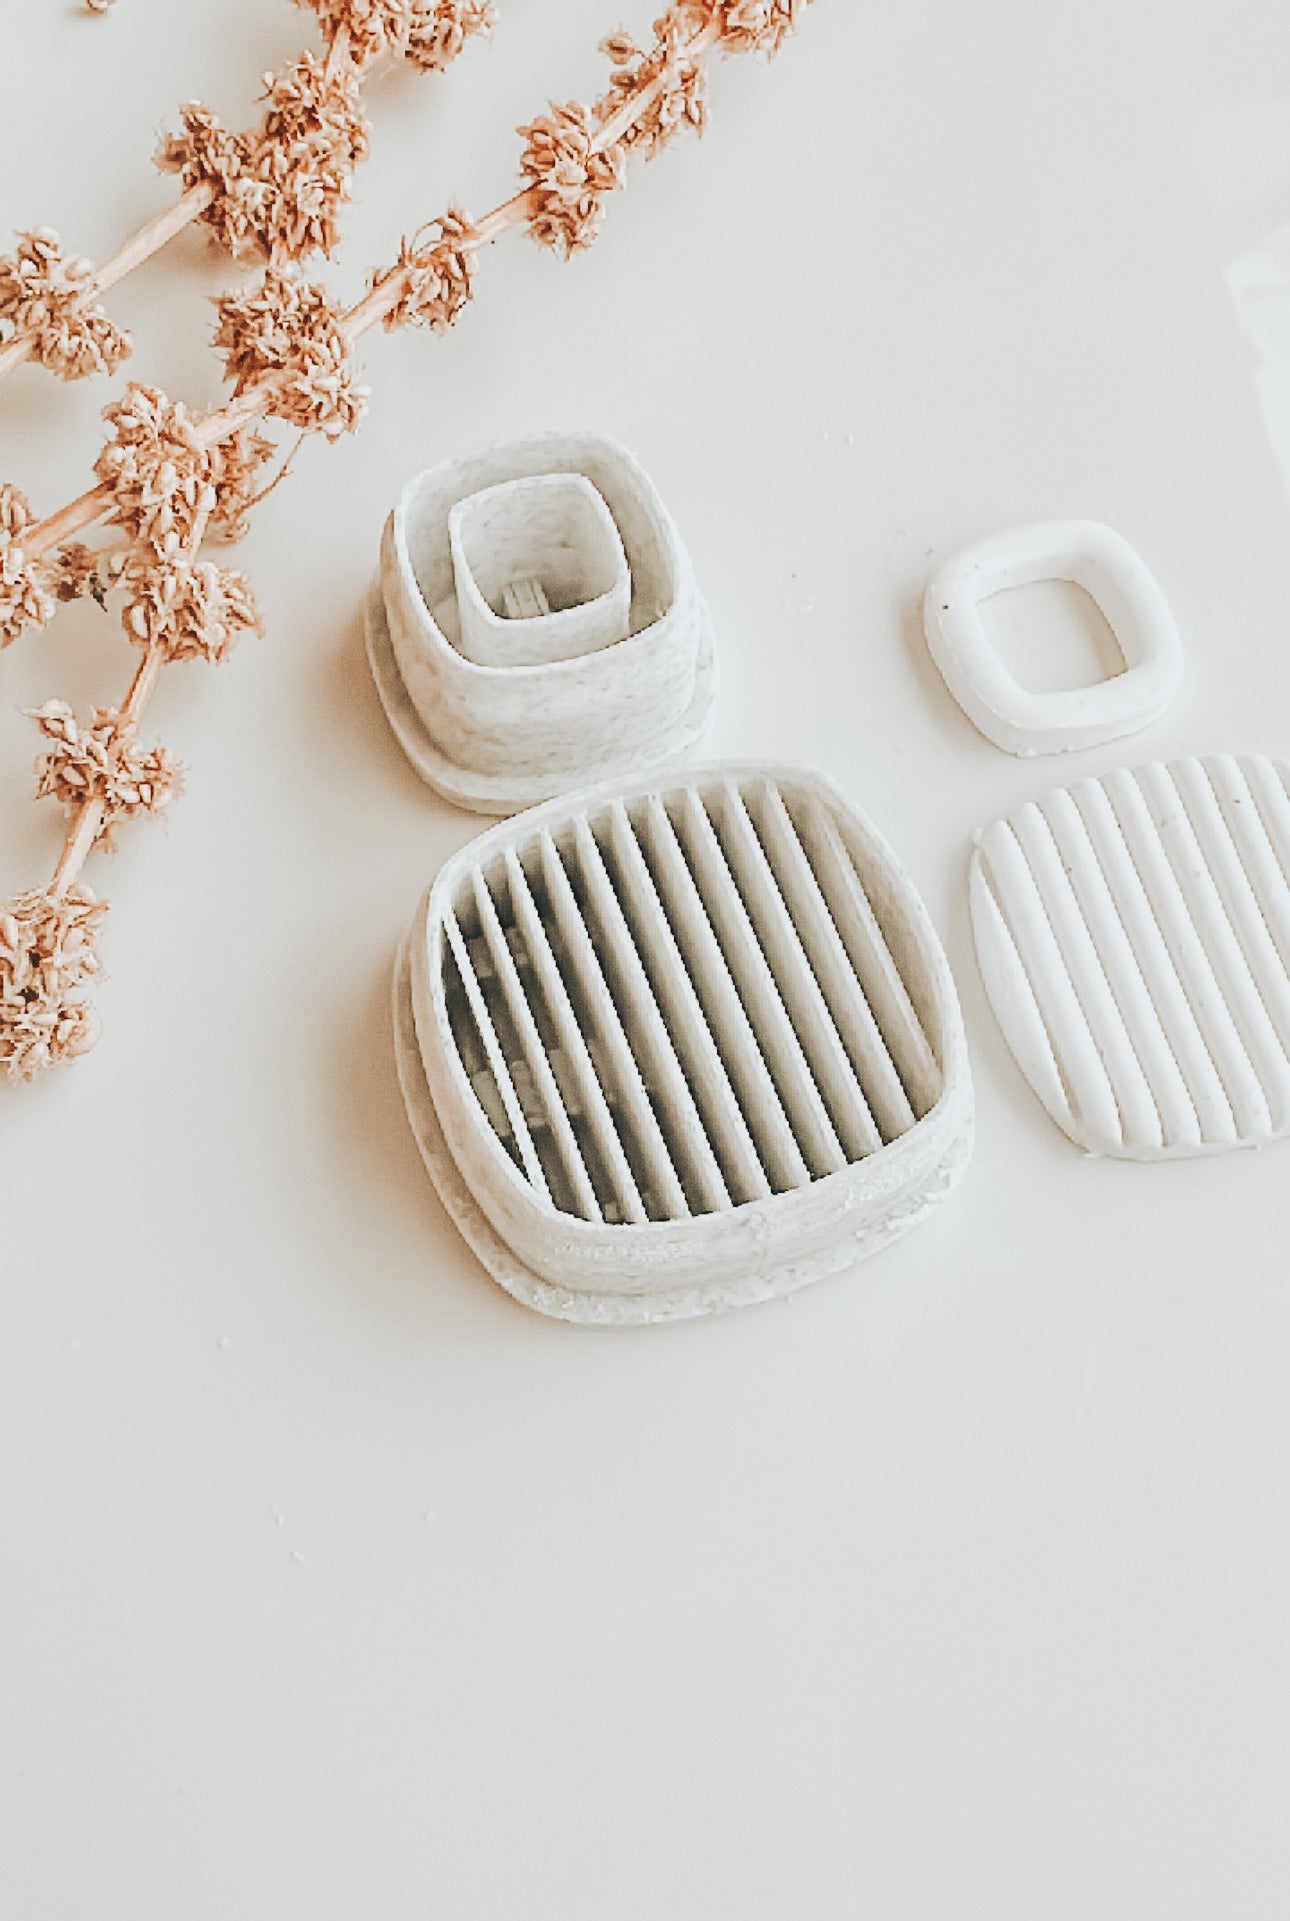 Ribbed Mabel Clay Cutter Set